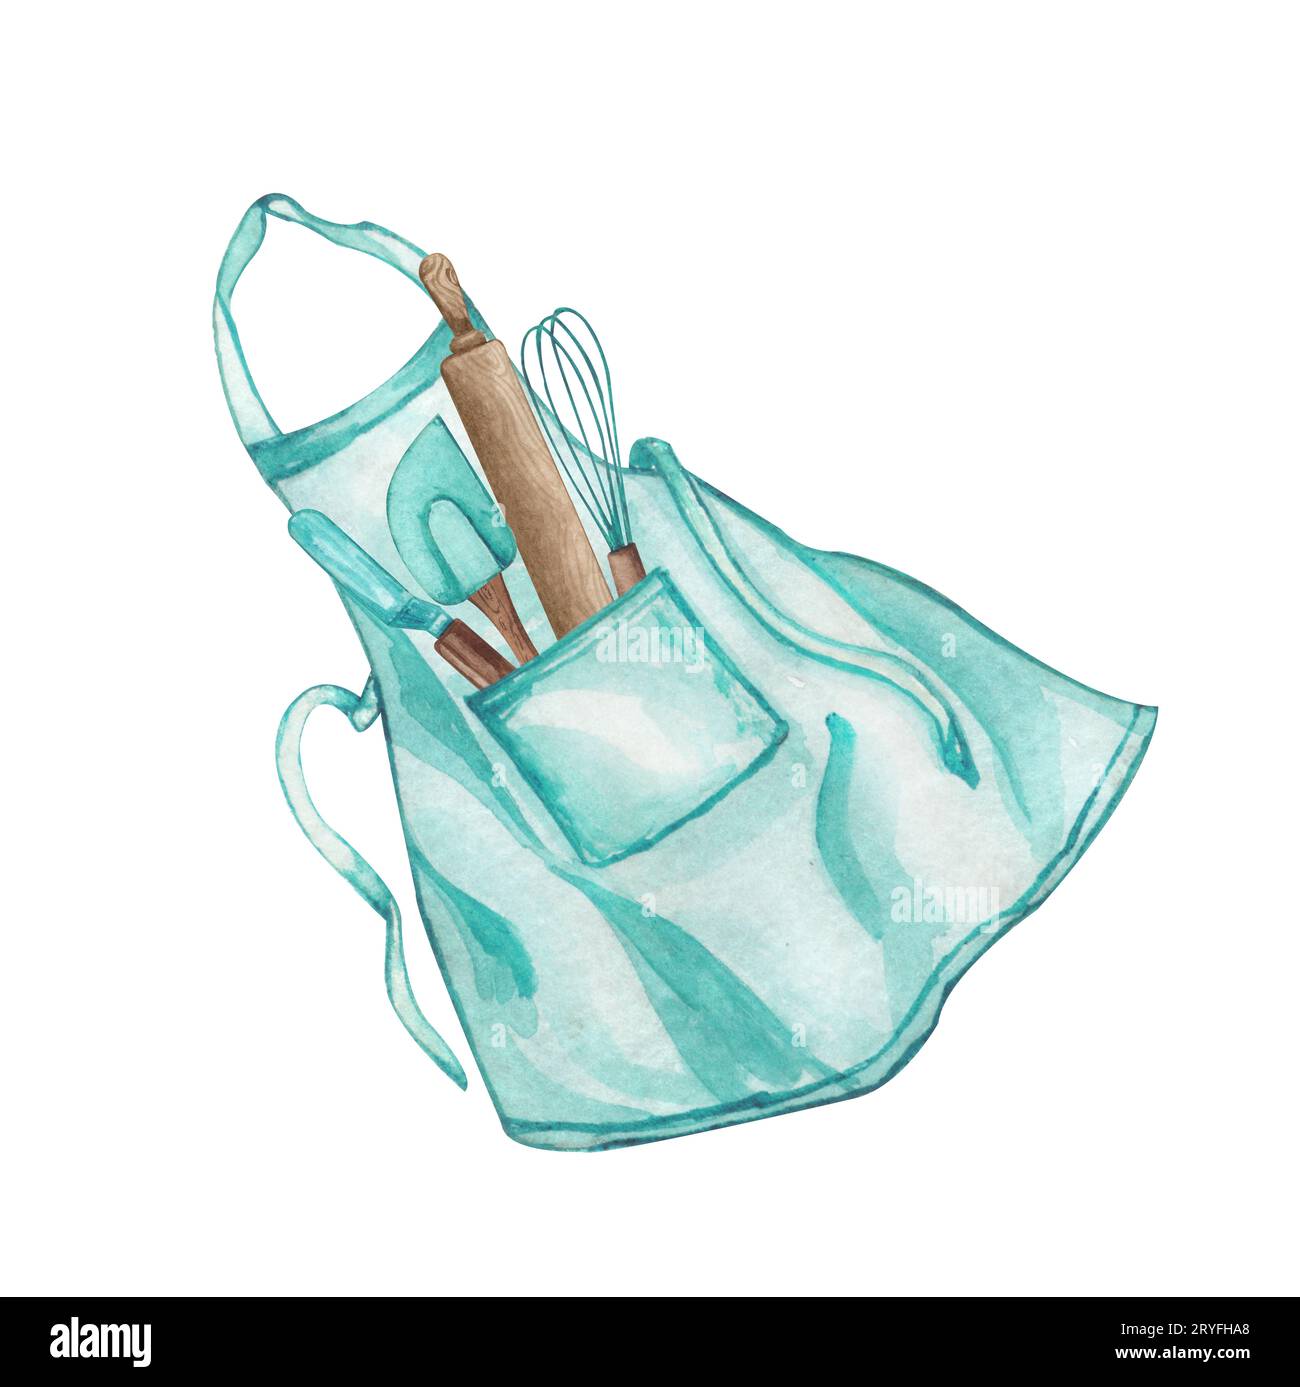 https://c8.alamy.com/comp/2RYFHA8/baking-watercolor-illustration-with-kitchen-utensils-inside-a-apron-on-white-background-top-view-hand-drawn-cooking-clip-art-2RYFHA8.jpg